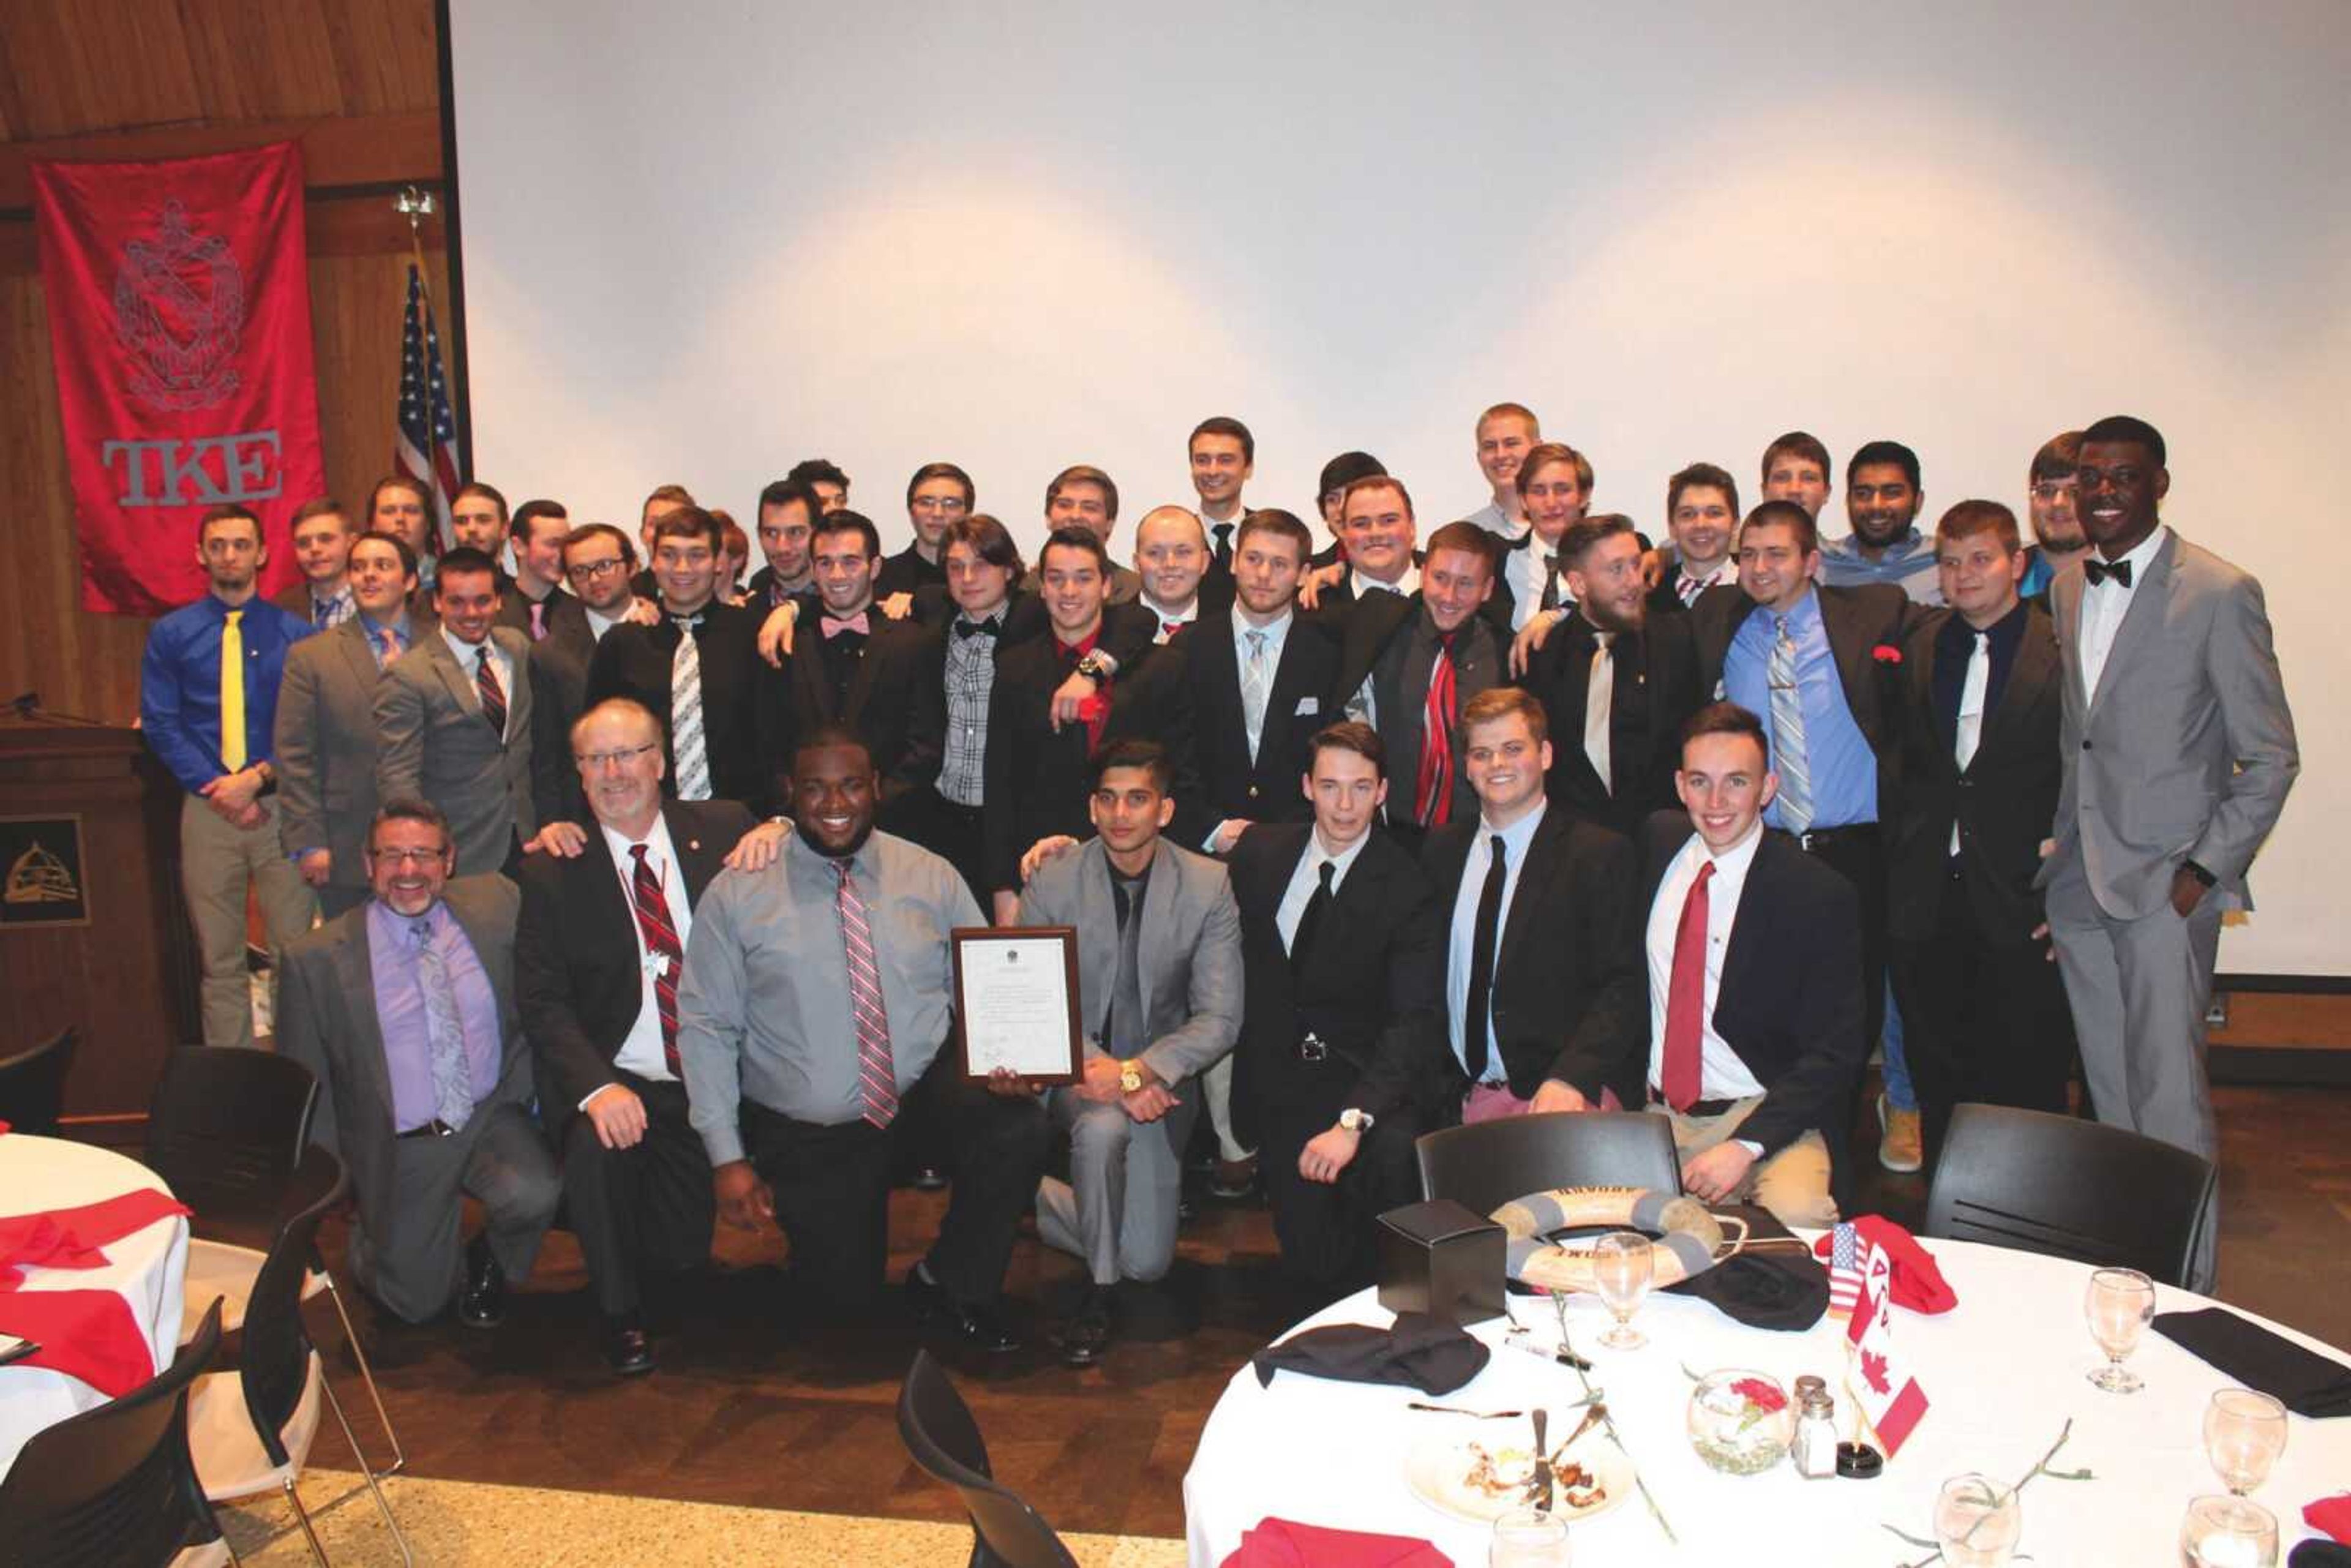 Following the events of spring bid day on Jan. 29, the former members of TKE and the â€śrefoundingâ€ť fathers of the chapter met for their chartering banquet.